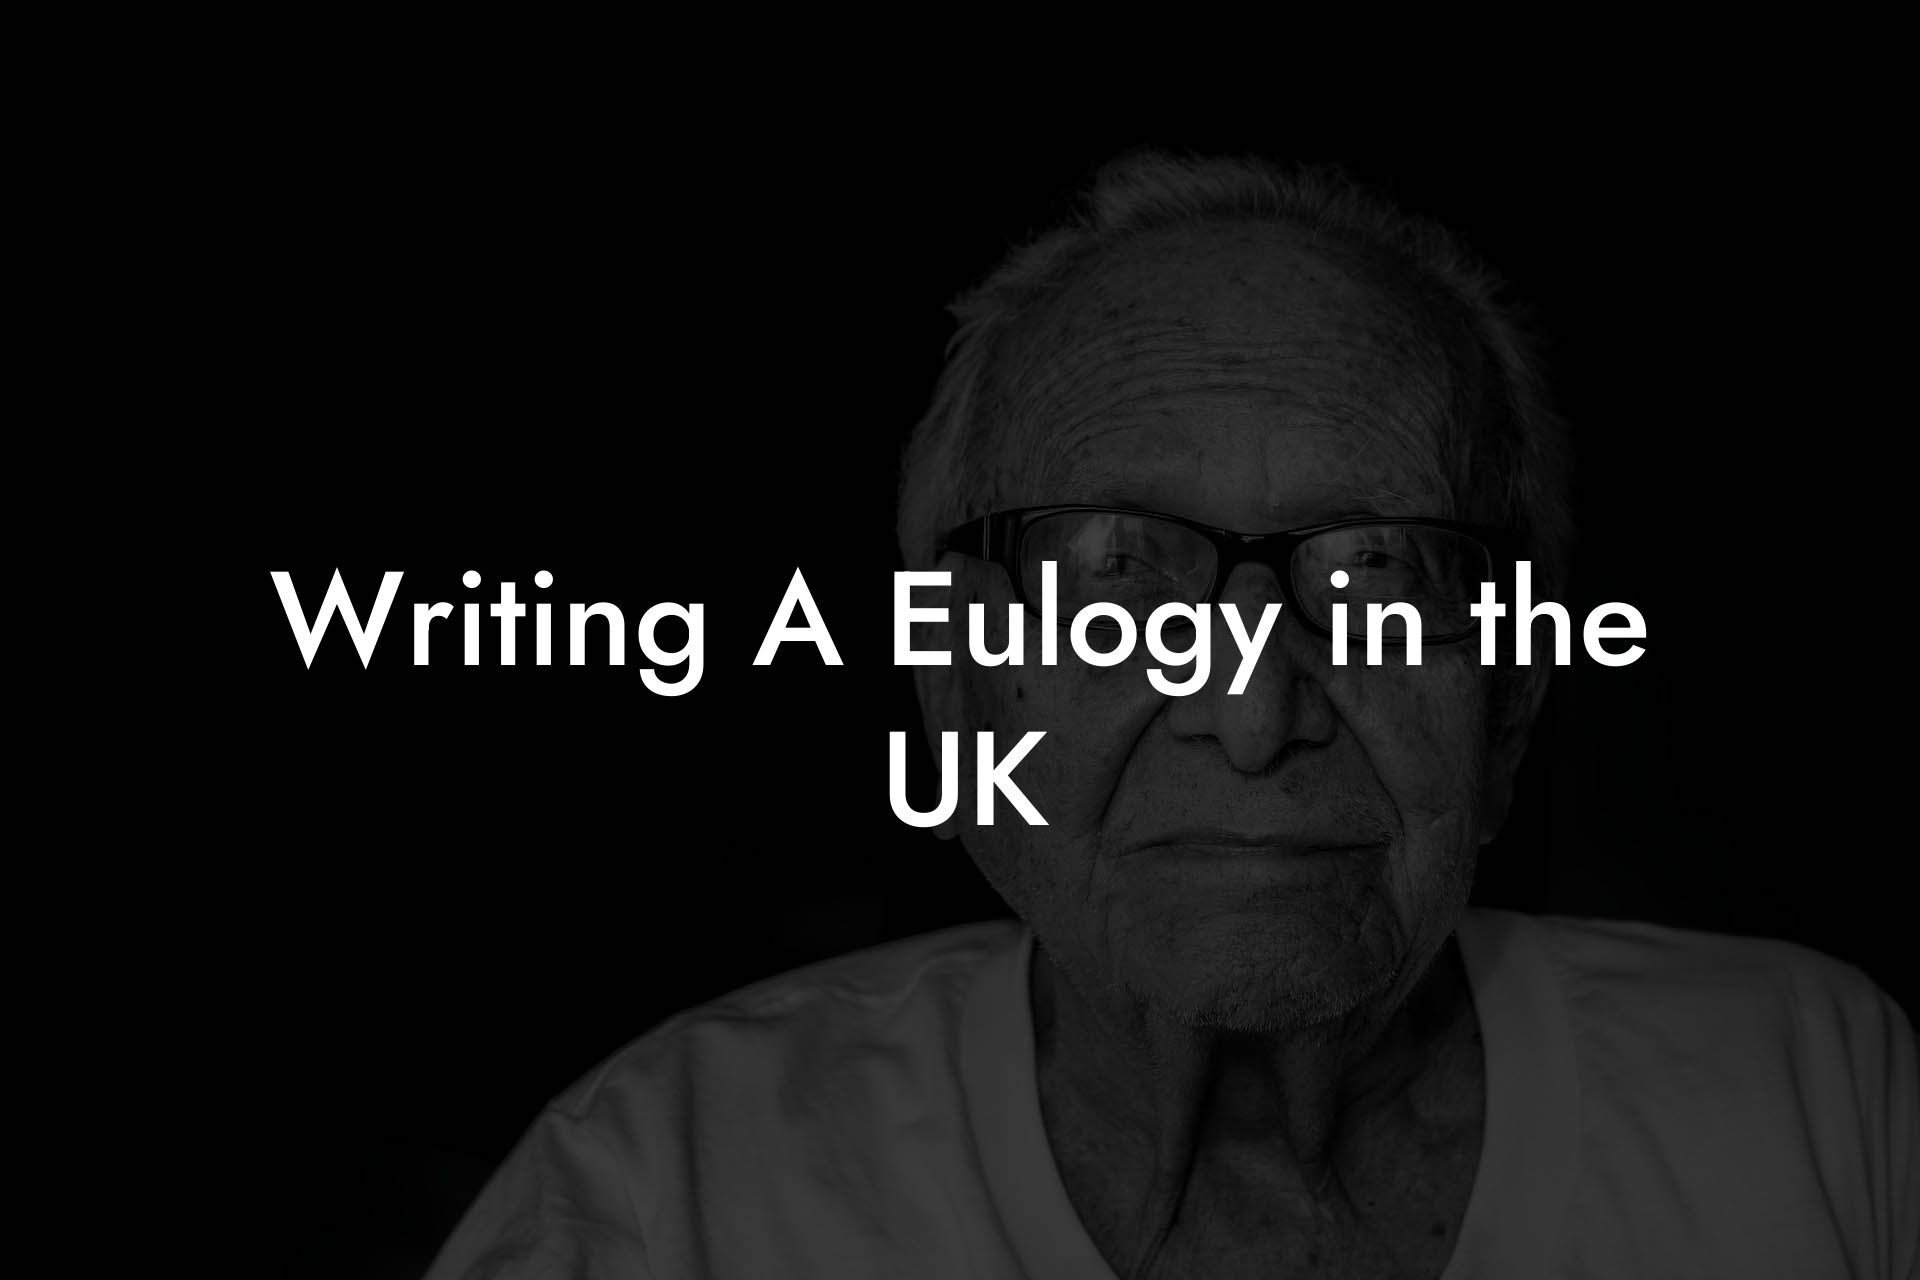 Writing A Eulogy in the UK